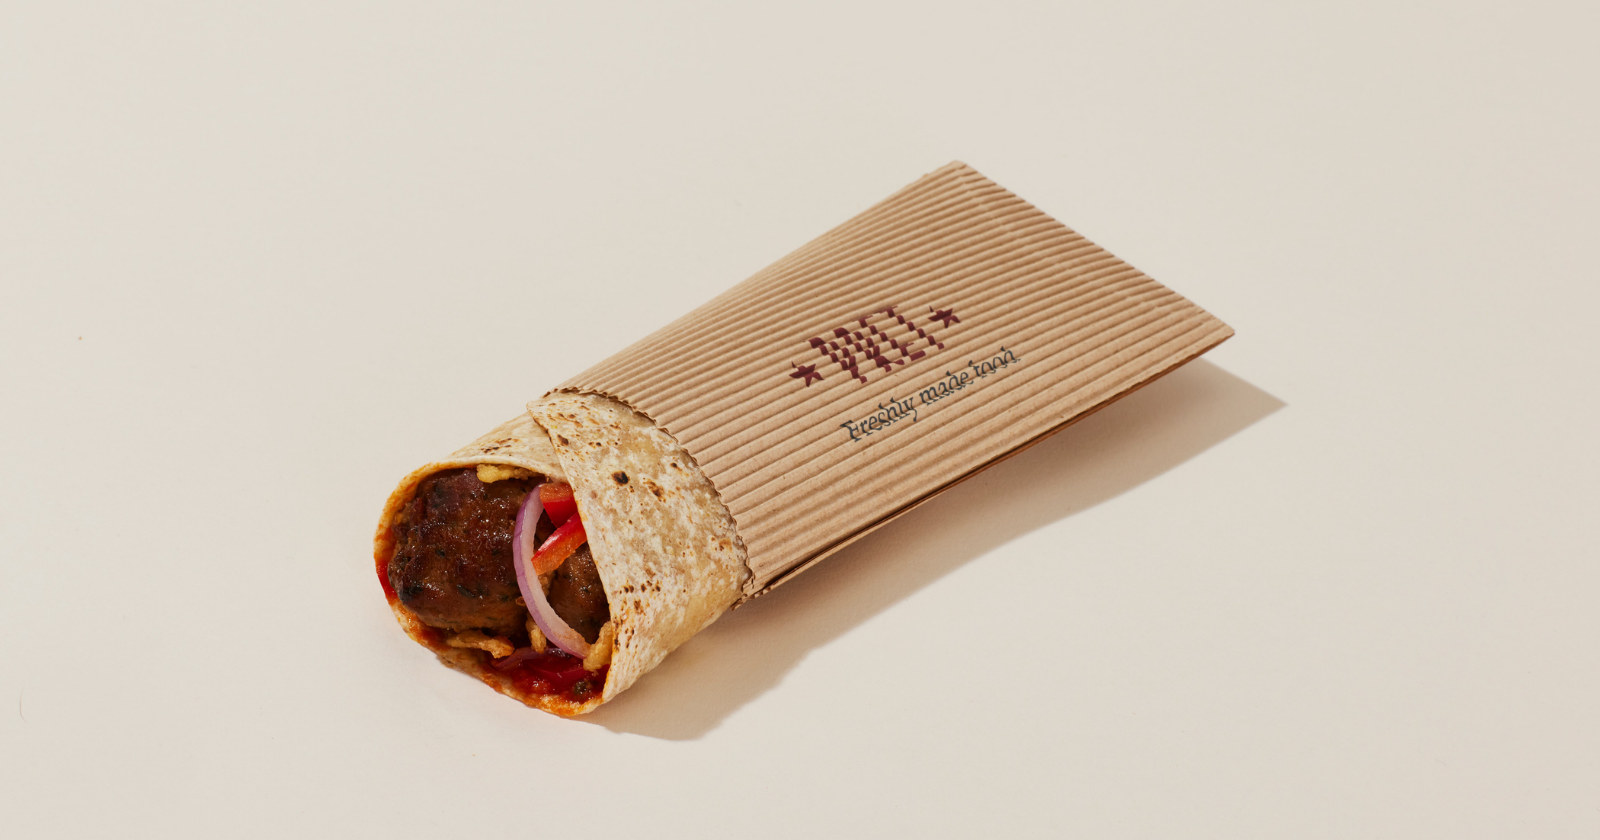 After the success in the United Kingdom, Pret a Manger's vegan wrap is coming to the United States